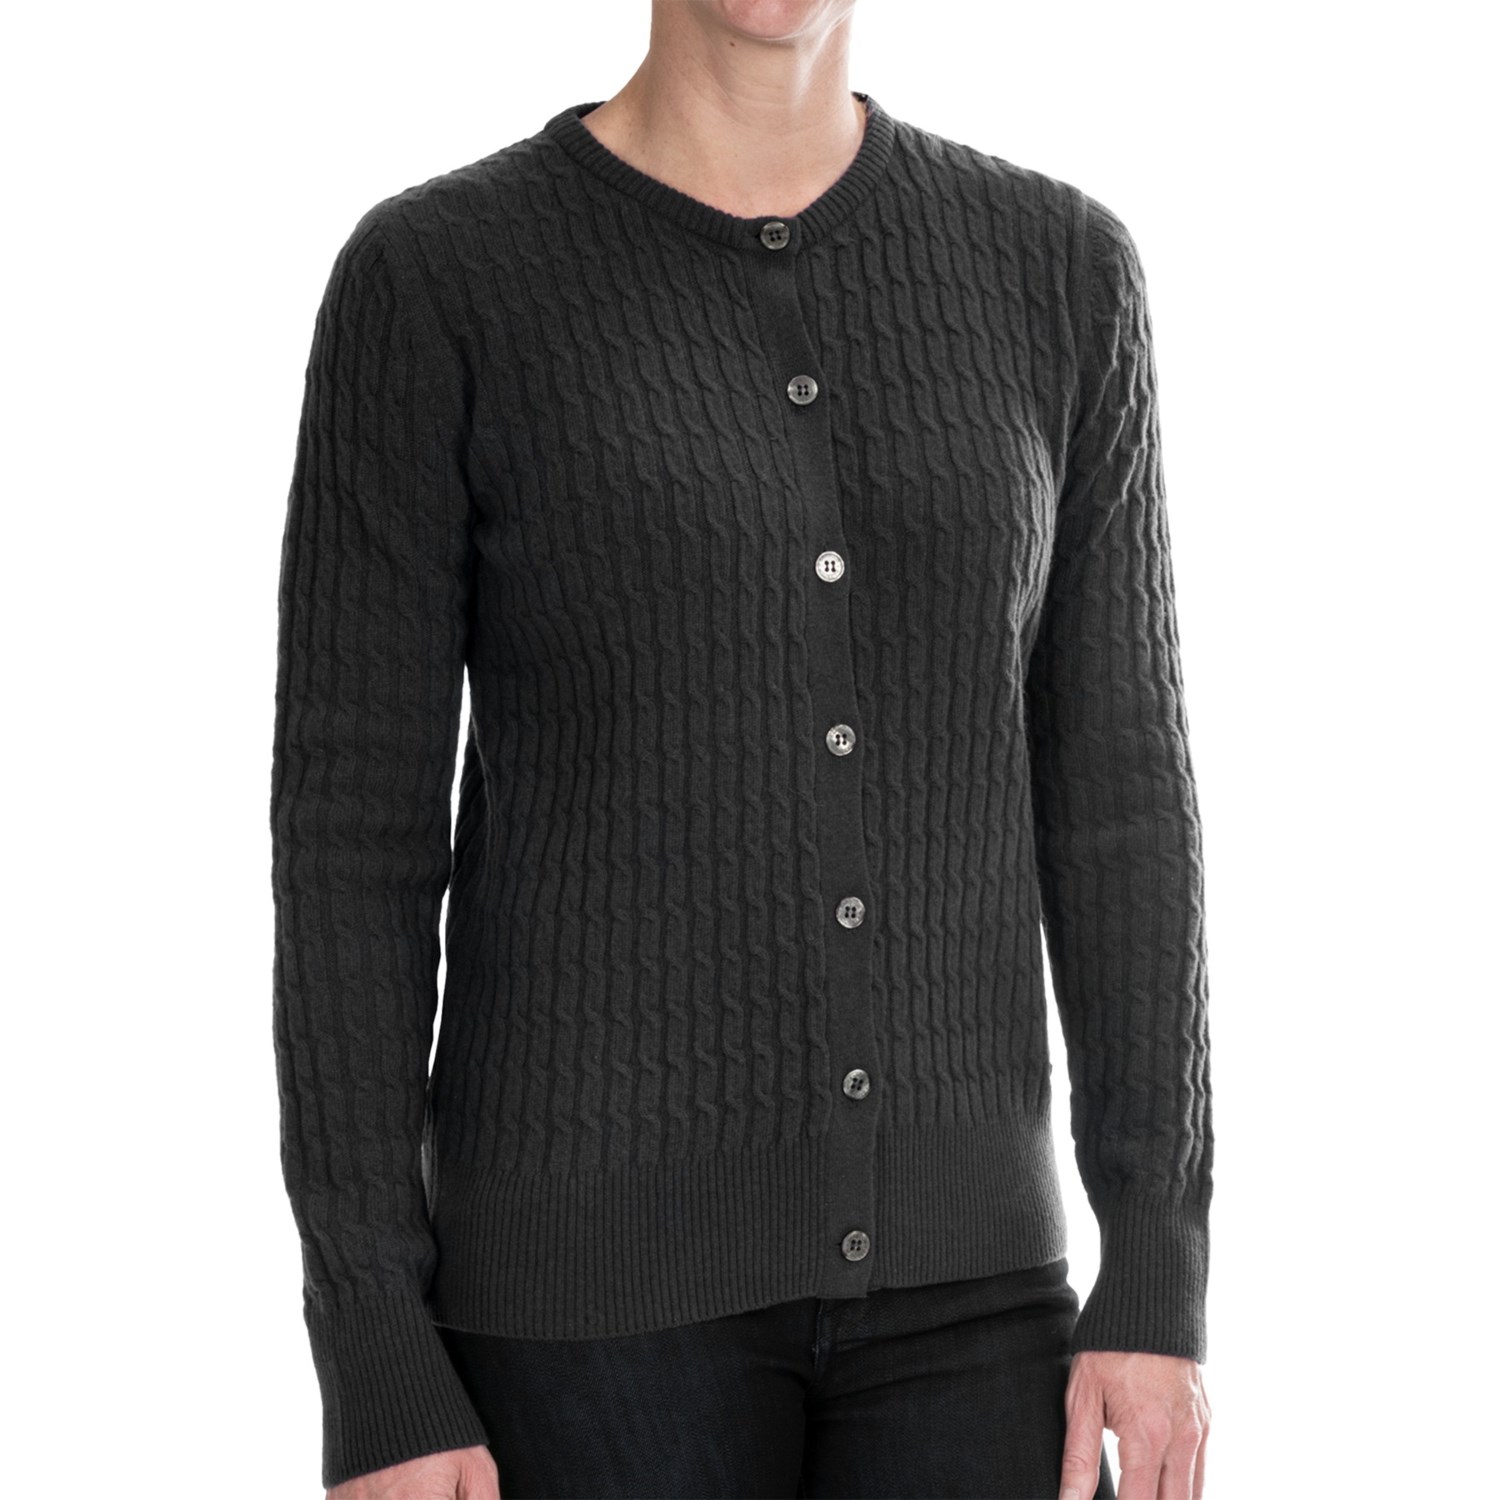 Barbour Langdale Cable-Knit Cardigan Sweater (For Women) 8653U - Save 53%